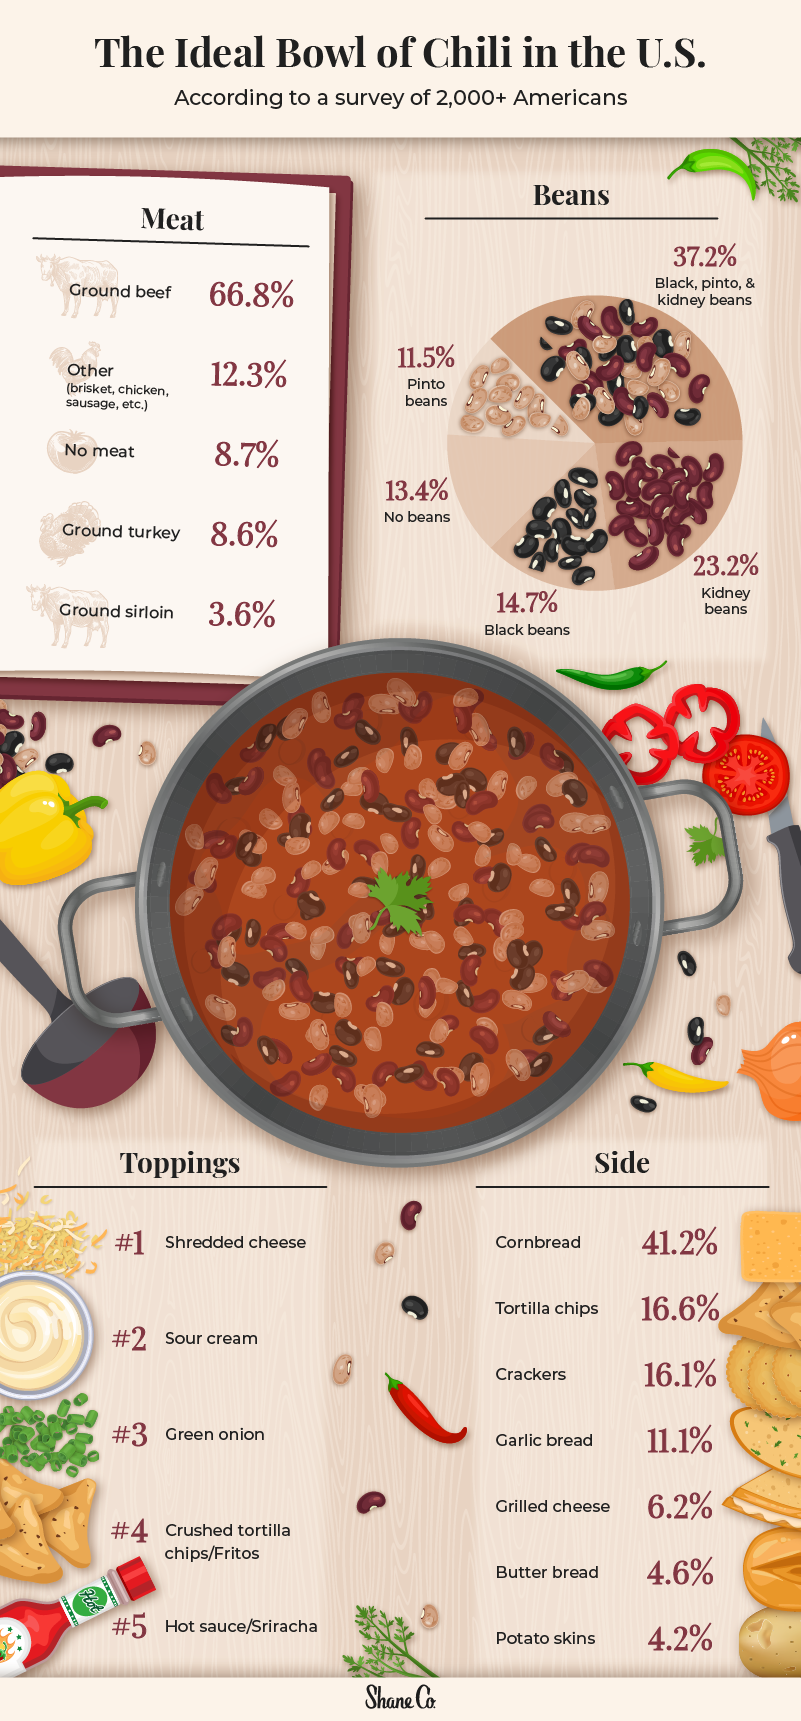 an infographic visualizing the ideal bowl of chili, according to U.S. survey responses